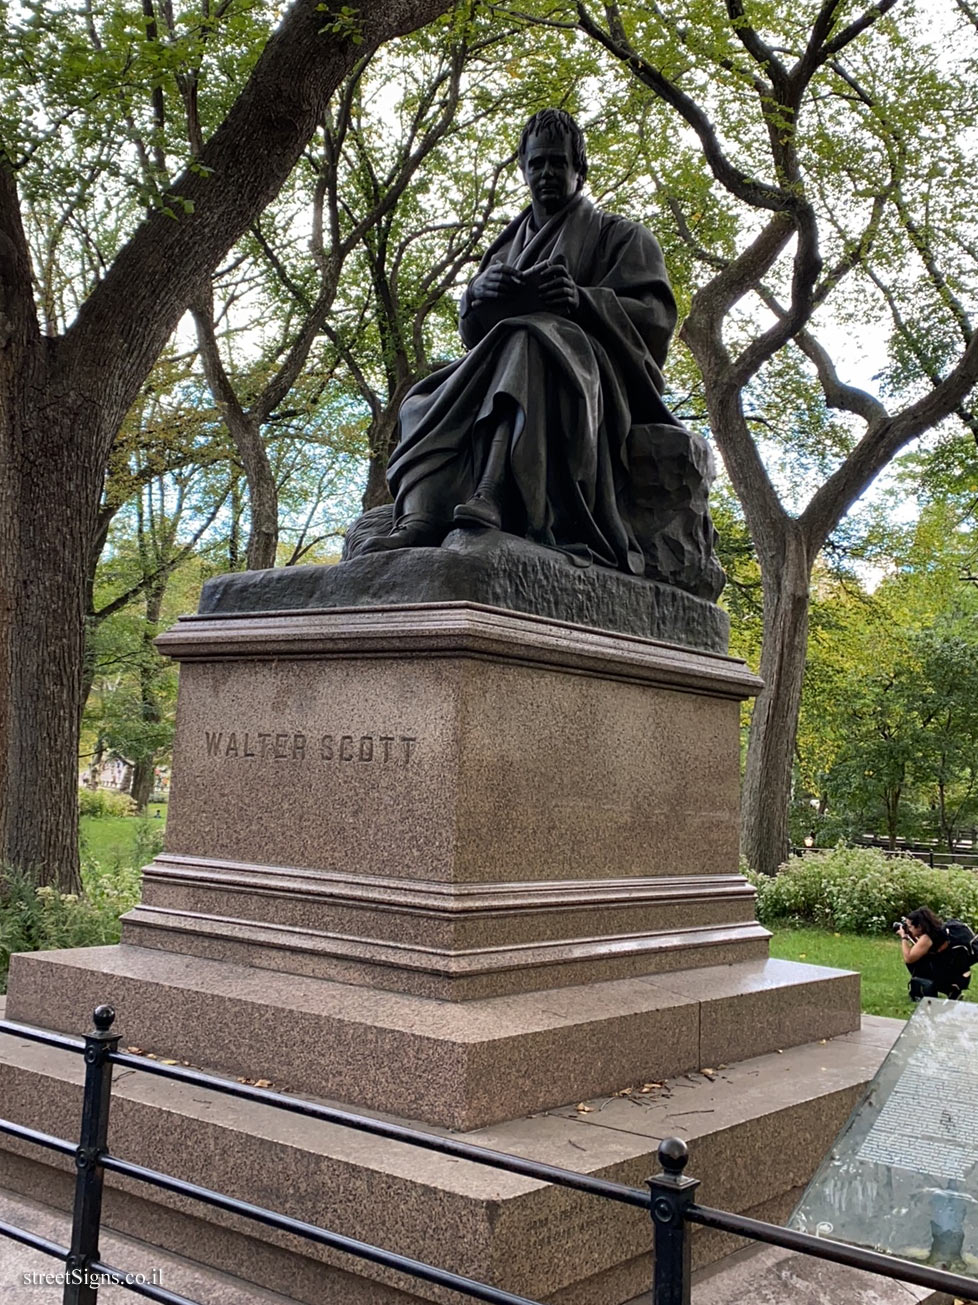 New York - Central Park - A statue in memory of Walter Scott - The Mall, New York, NY 10019, USA